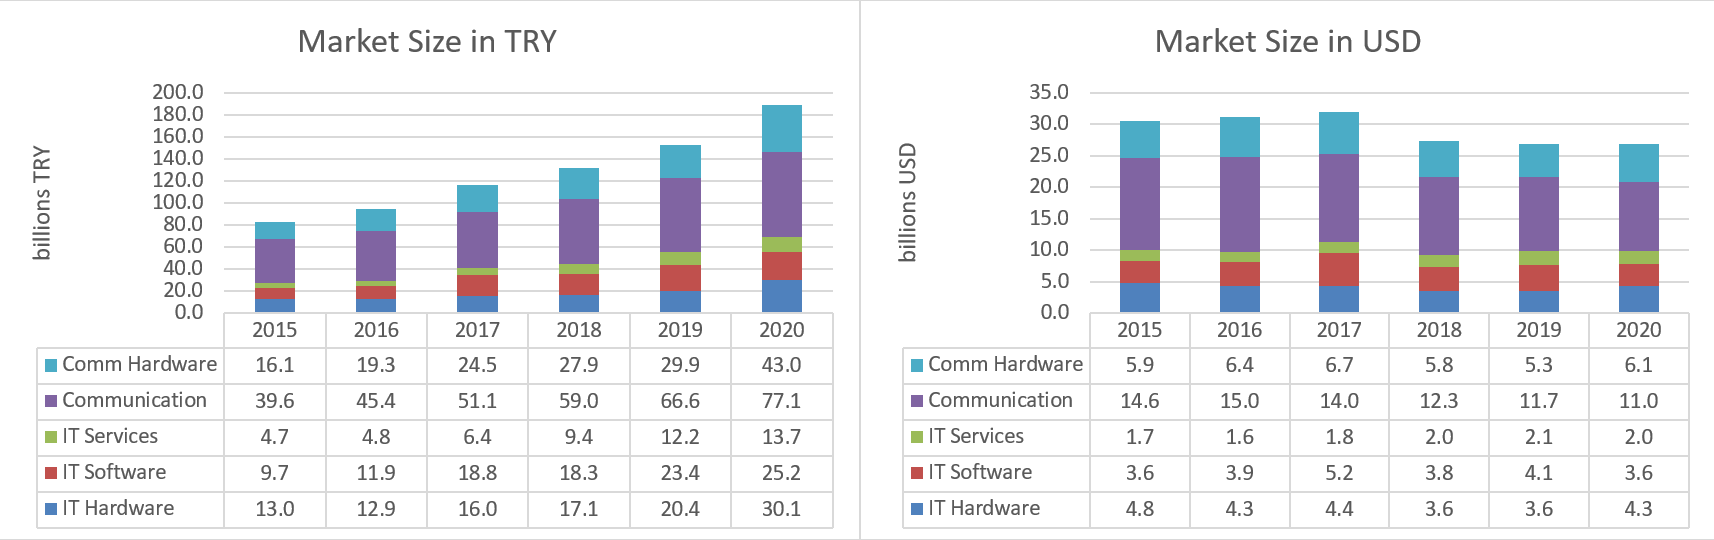 Market Size in TRY and USD for 2015- 2020